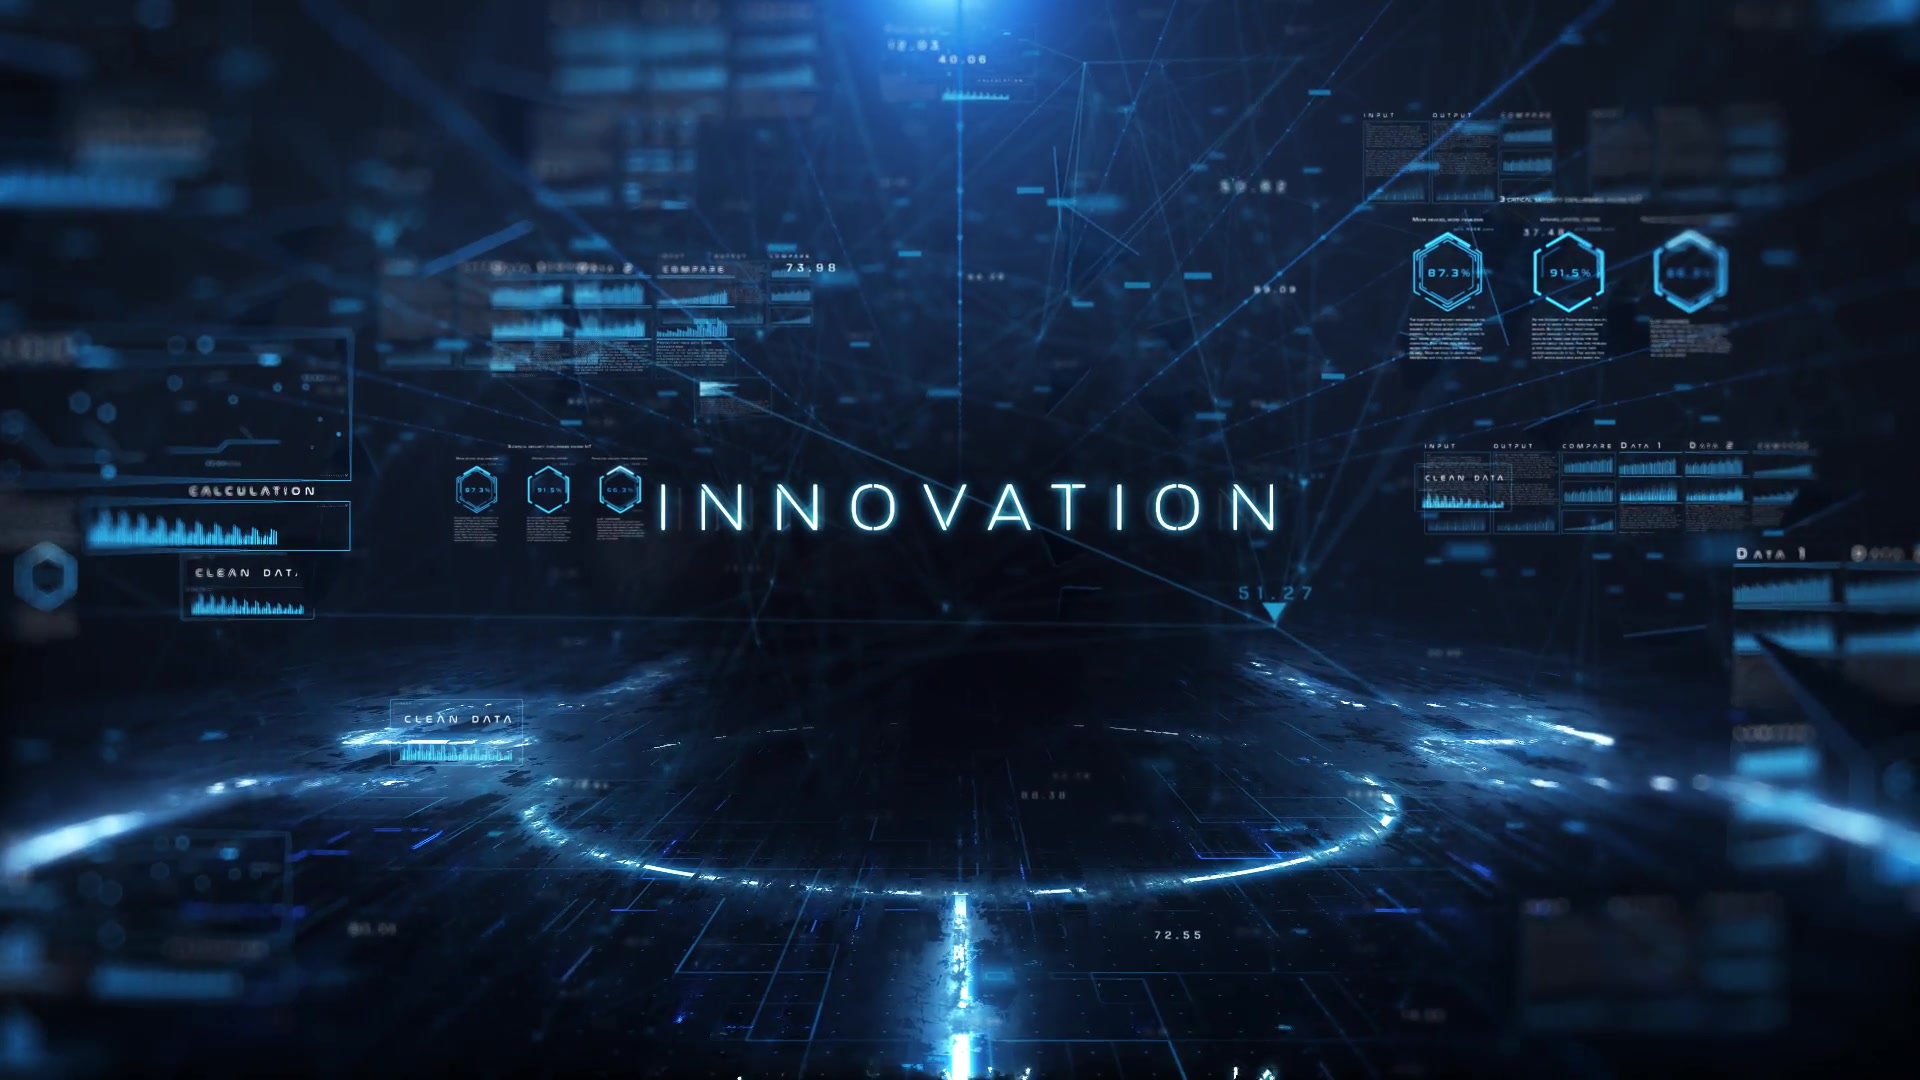 Technology - Download Videohive 21852086